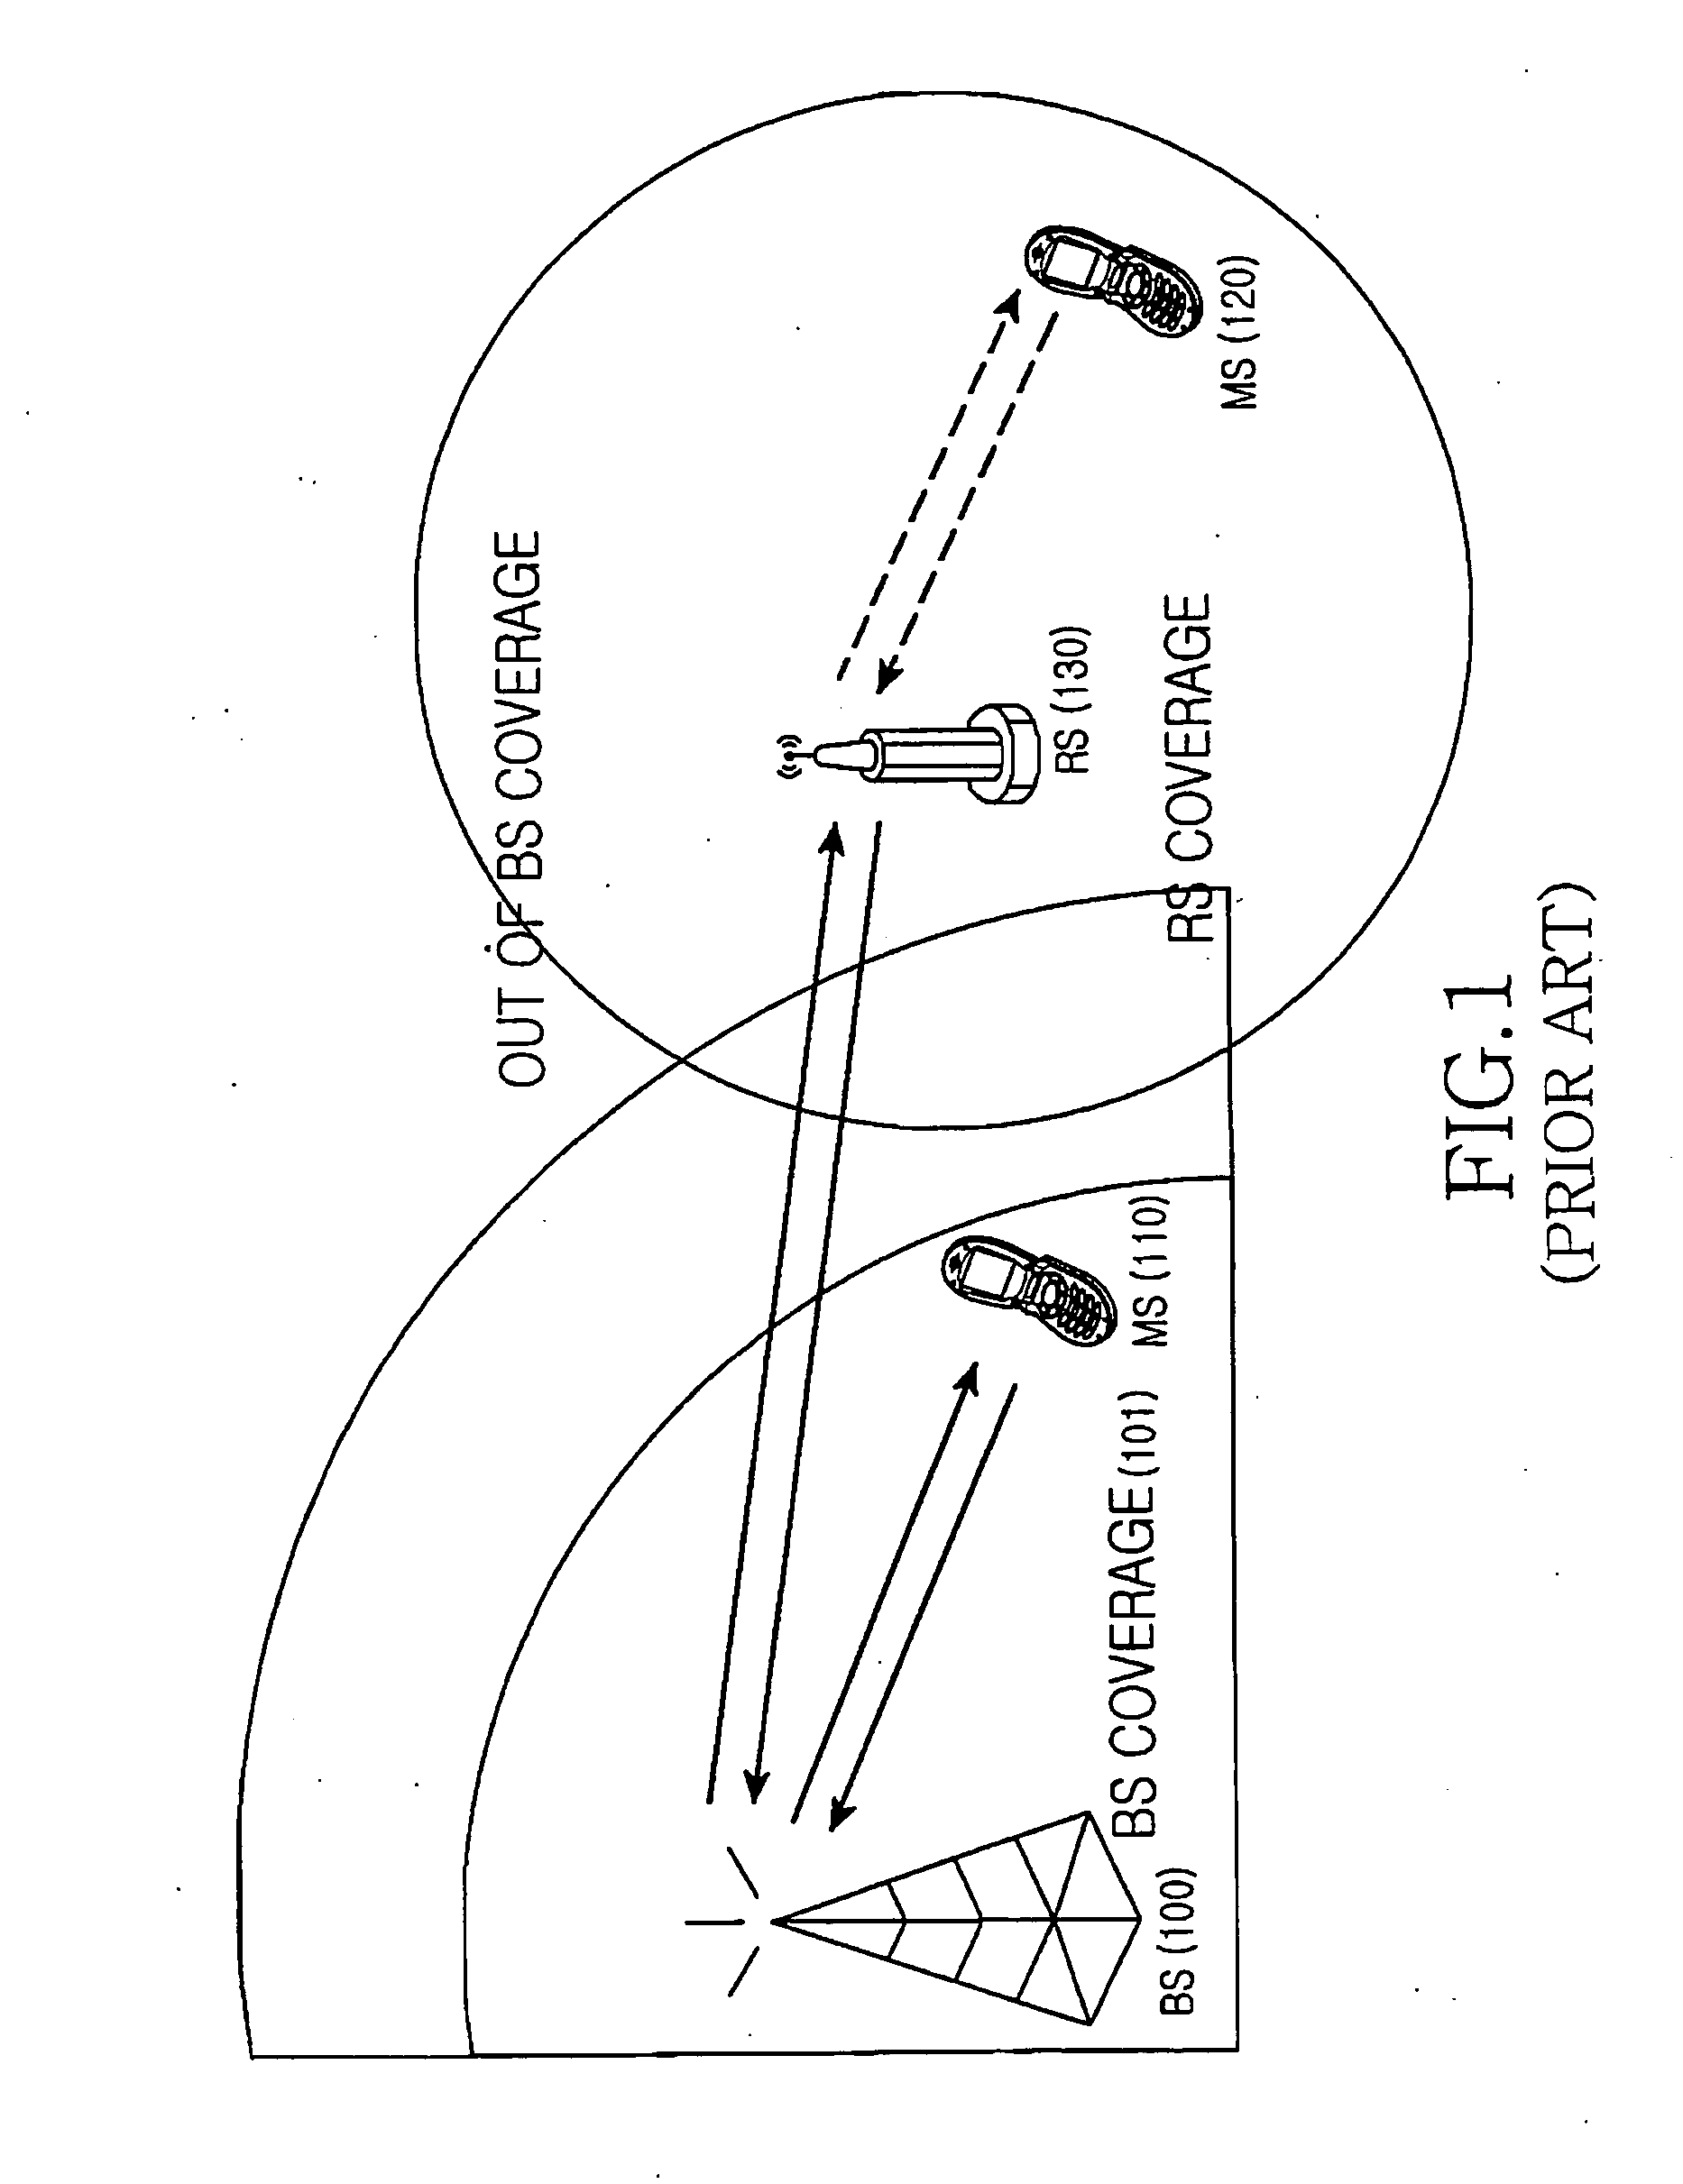 Apparatus and method of providing relay service in broadband wireless access (BWA) communication system